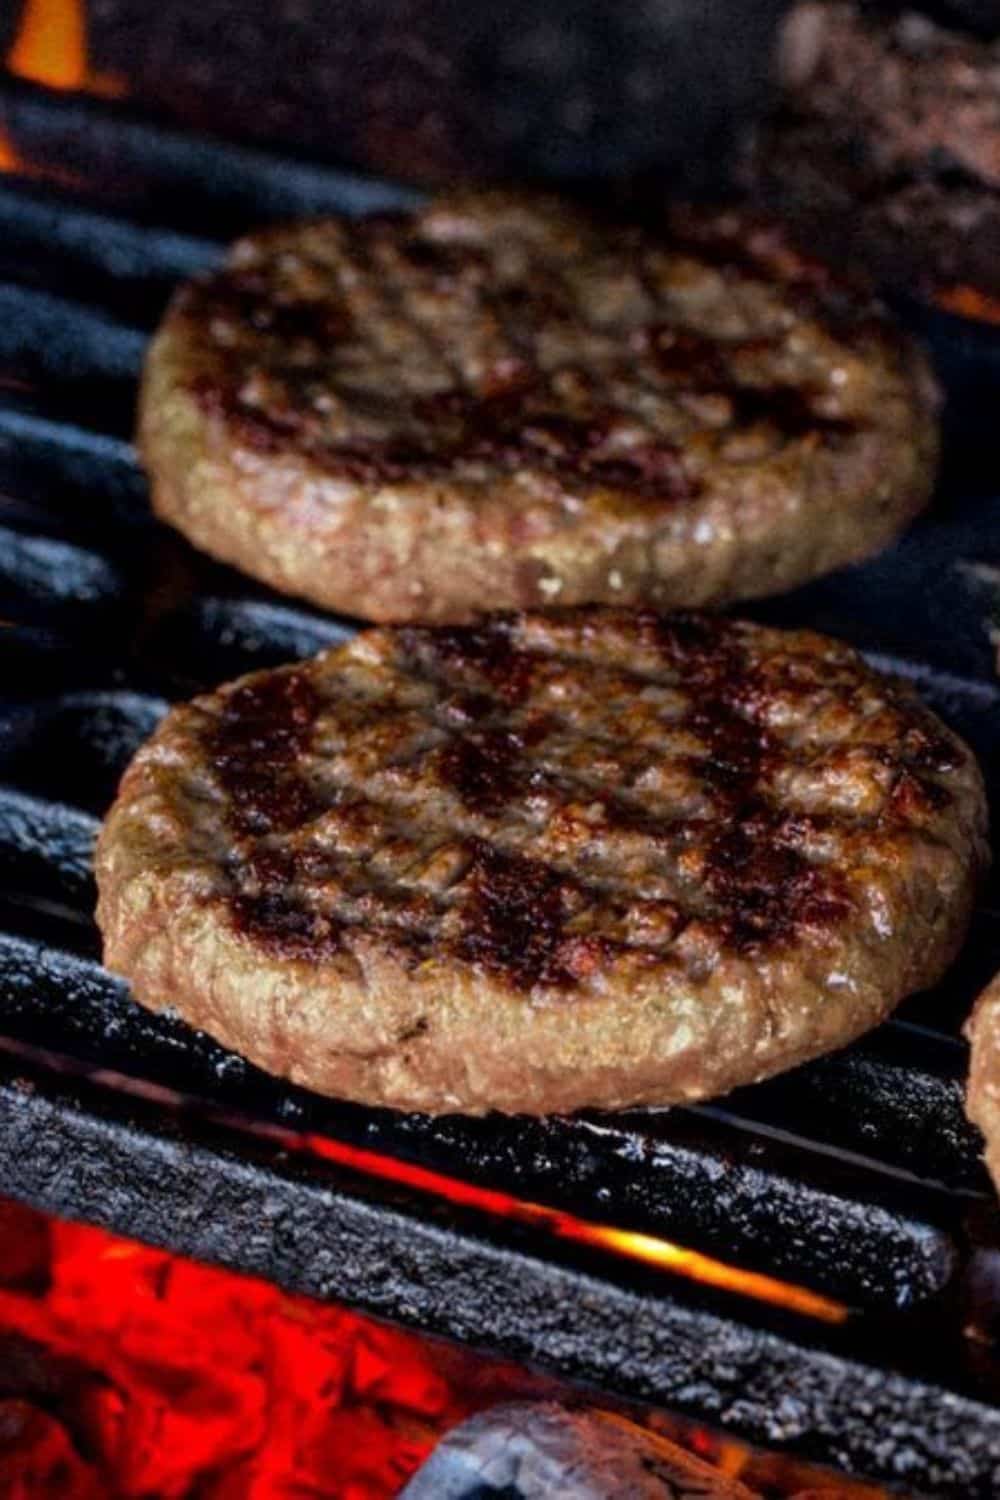 How to Cook Costco's Burgers